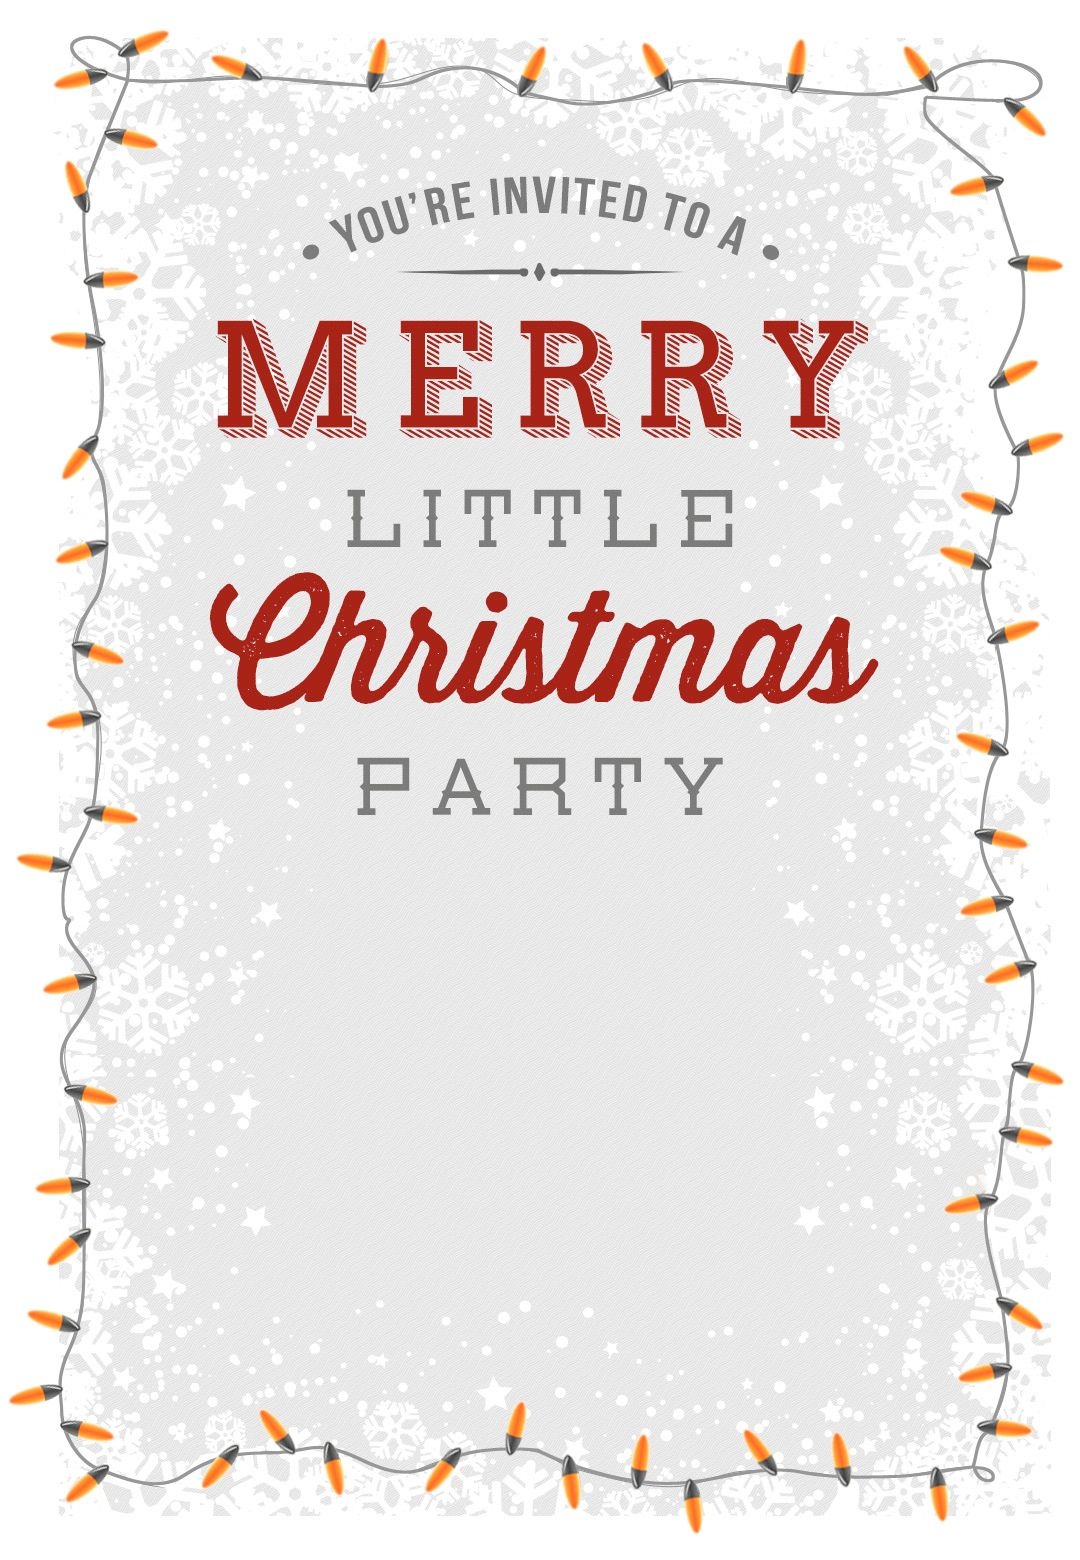 A Merry Little Party - Free Printable Christmas Invitation Template - Holiday Invitations Free Printable